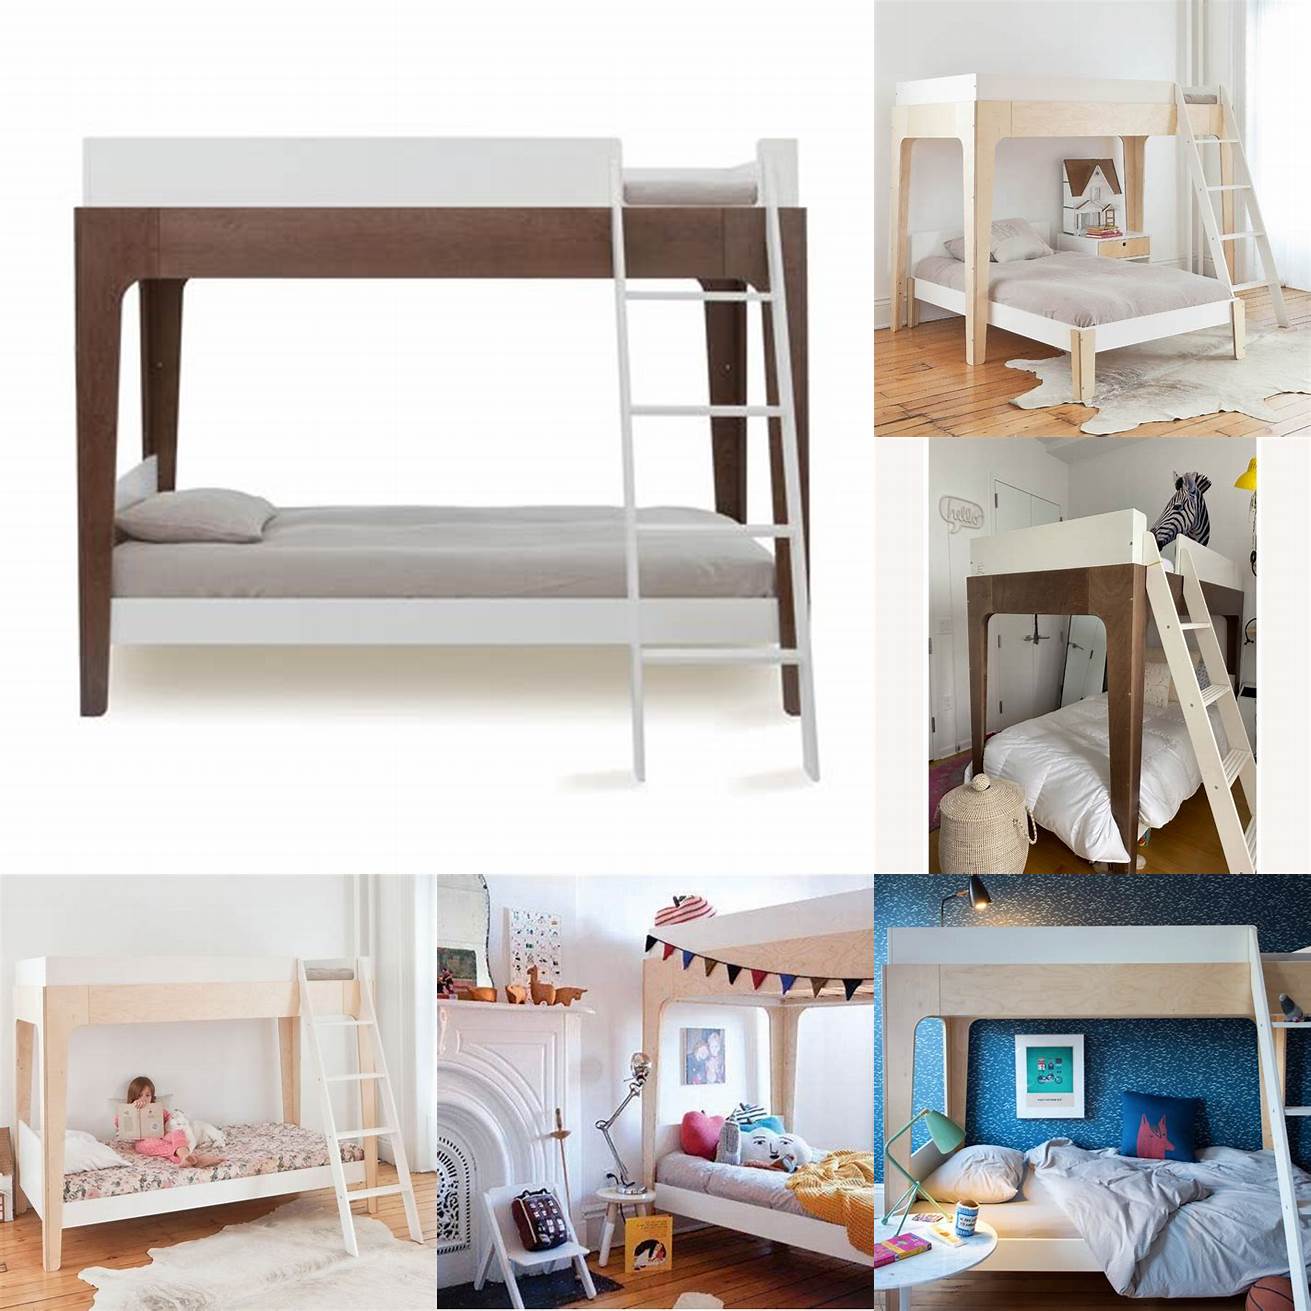 Image of the Oeuf Bunk Bed in a kids room